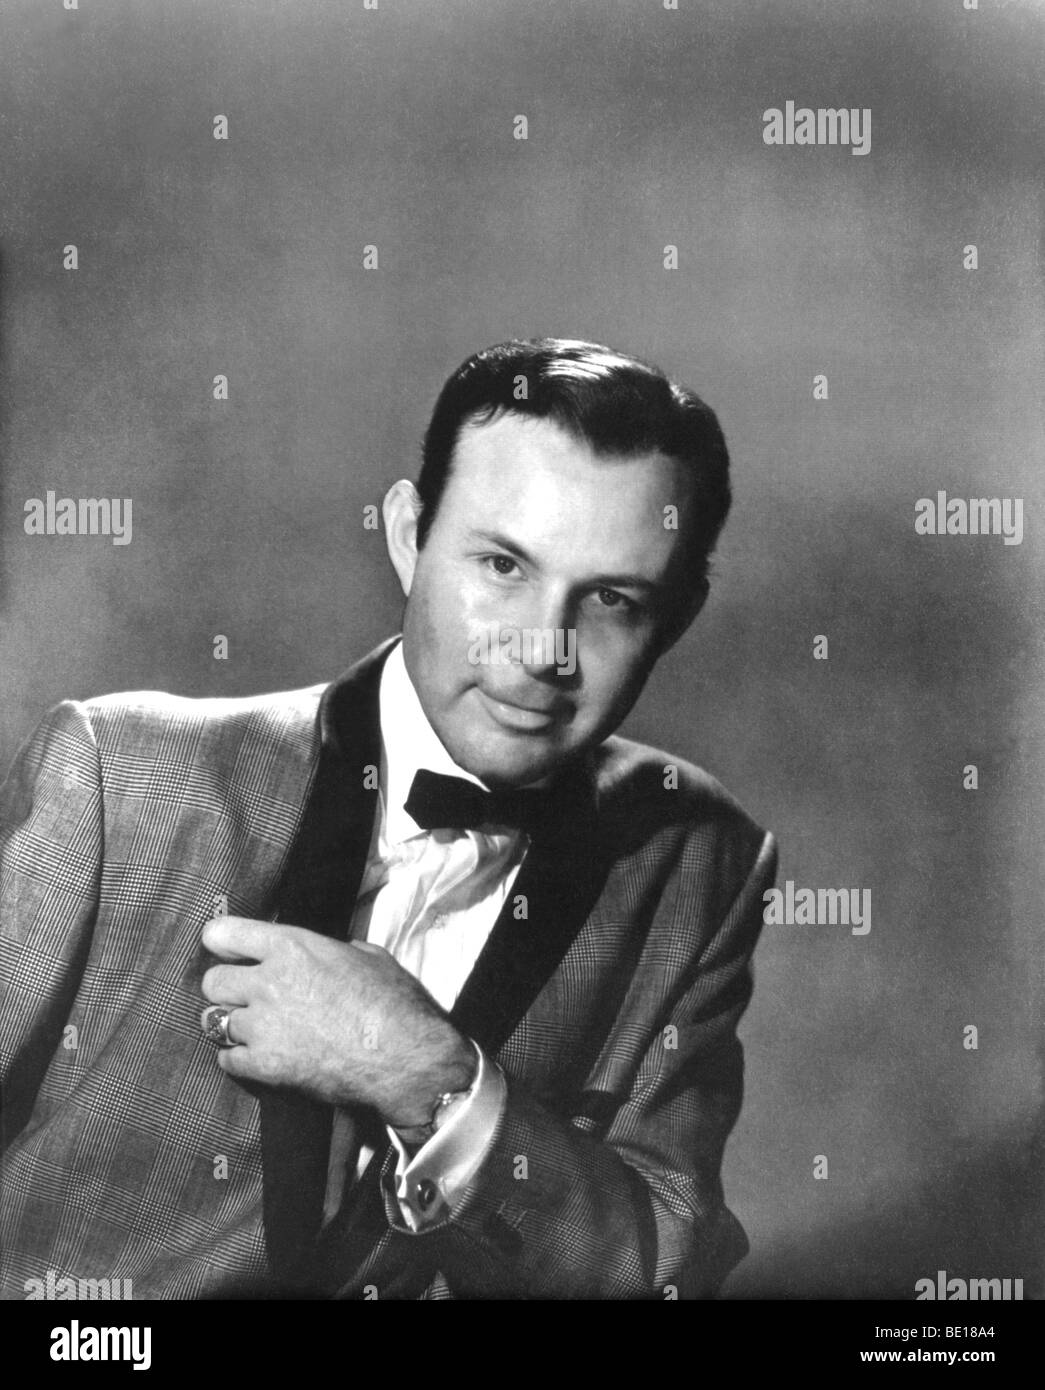 JIM REEVES - US Country & Western musician Stock Photo